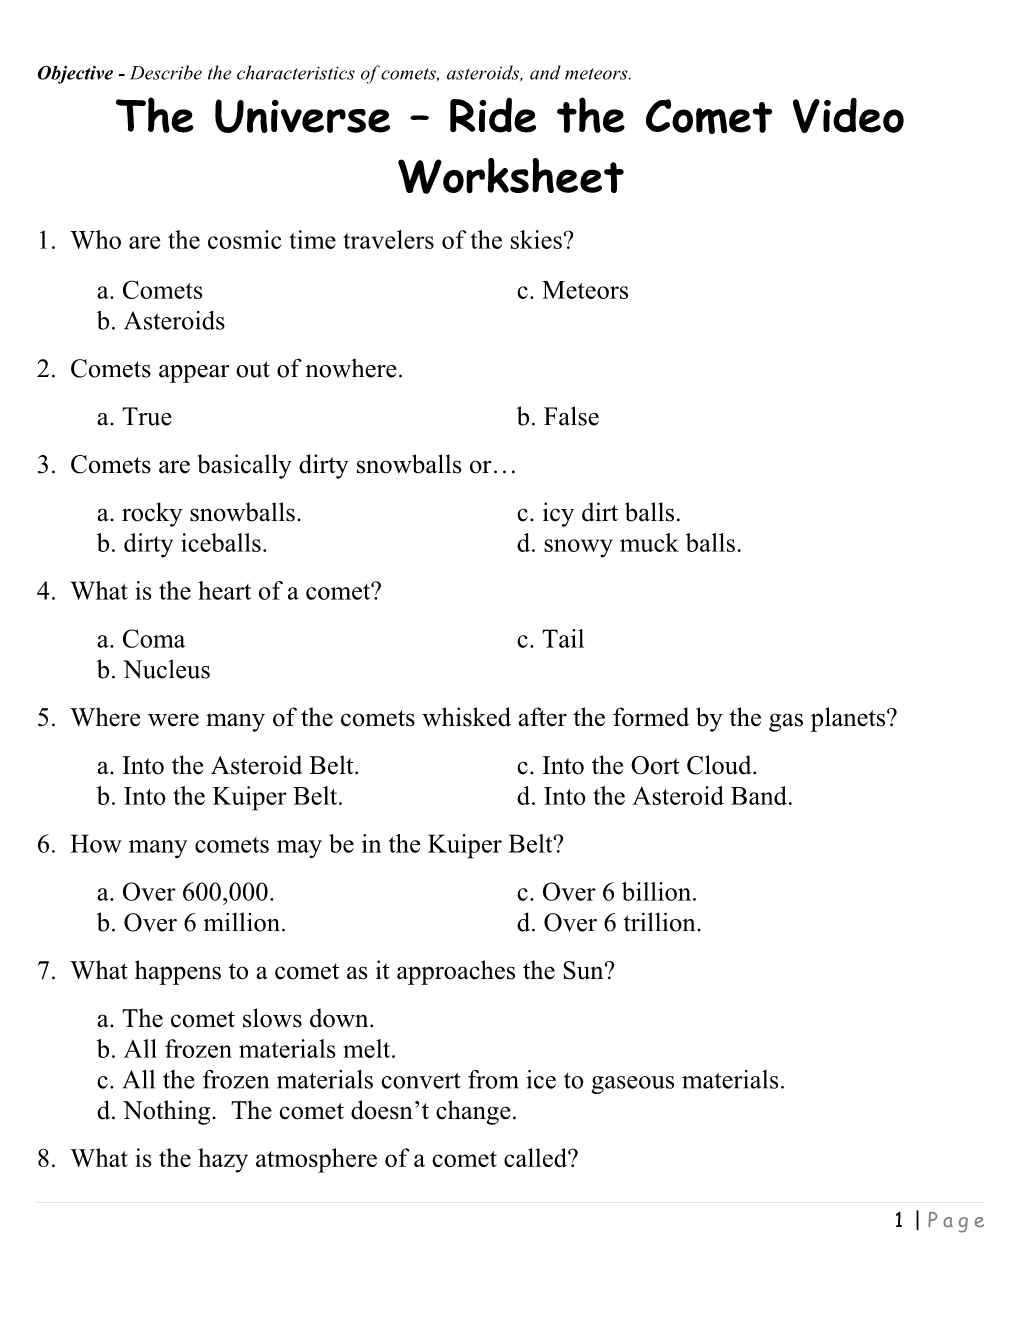 The Universe Ride the Comet Video Worksheet